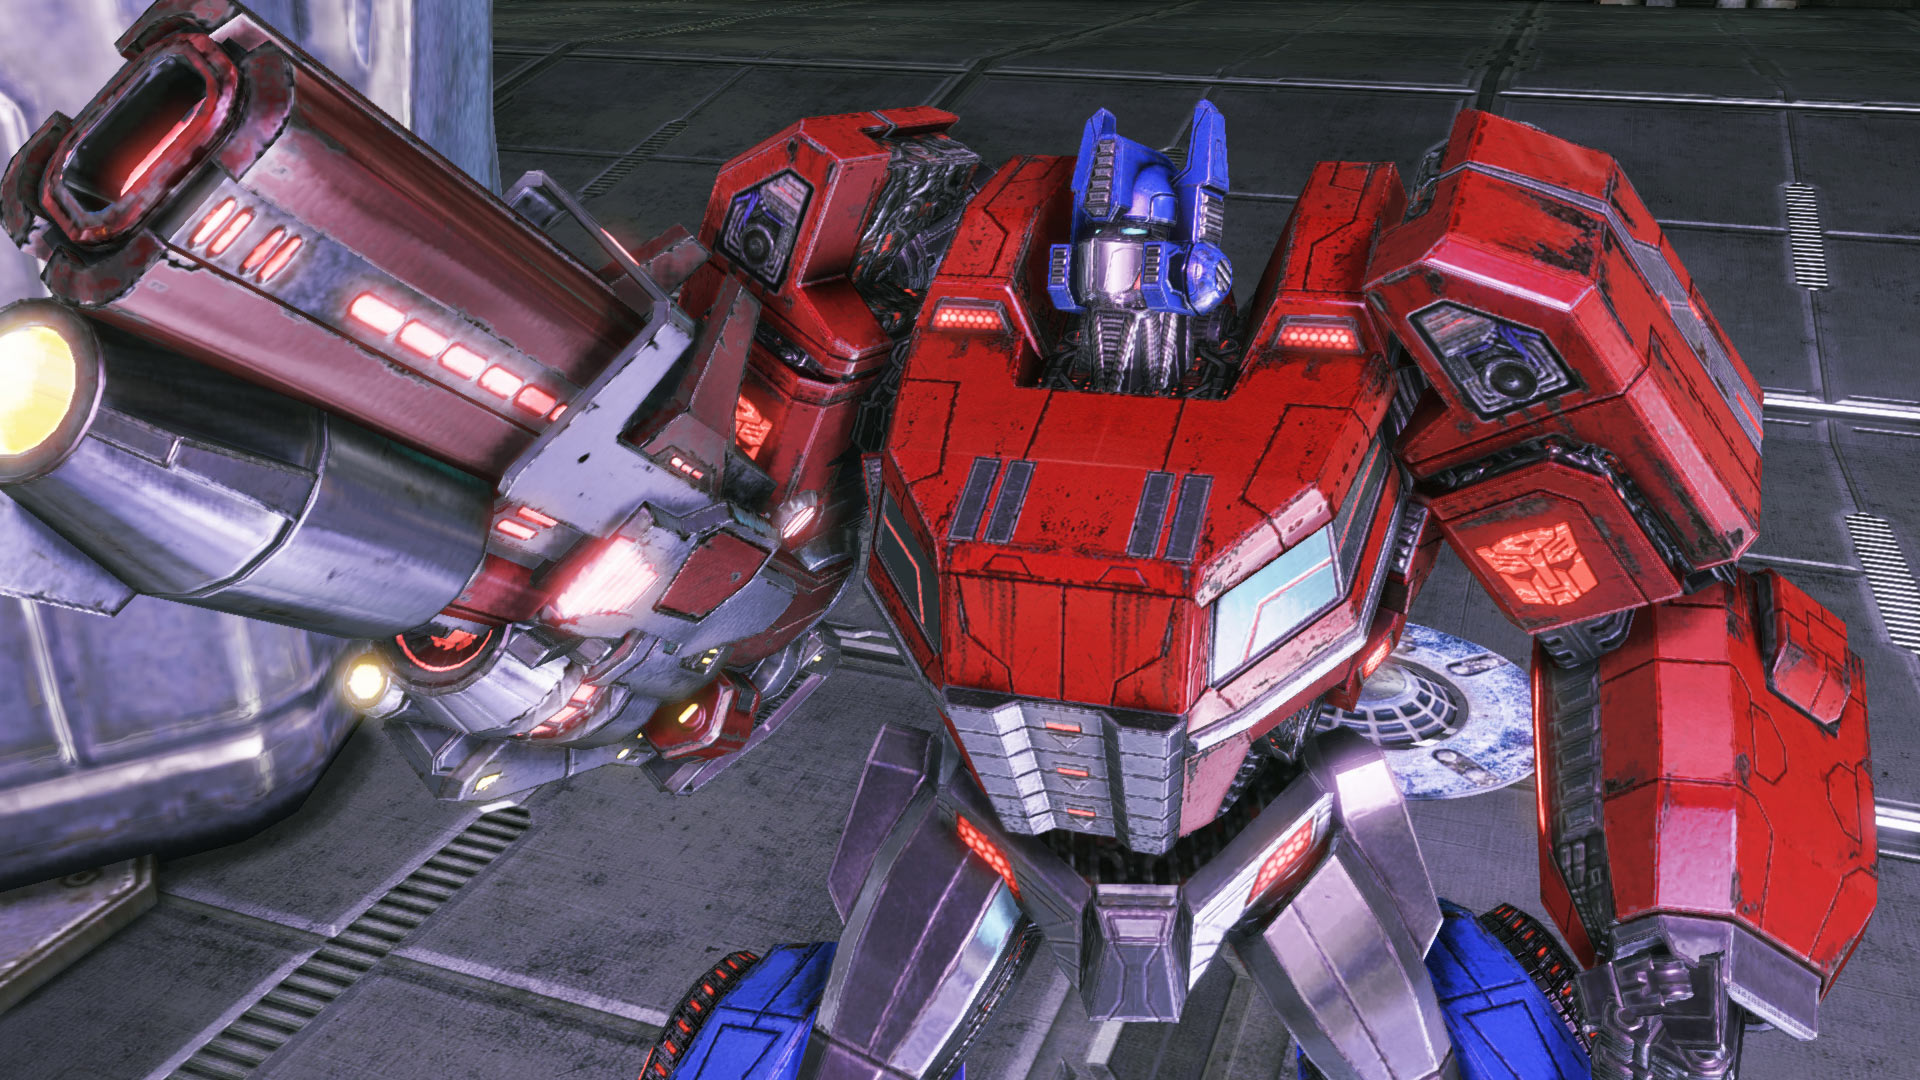 transformers the dark spark ps4